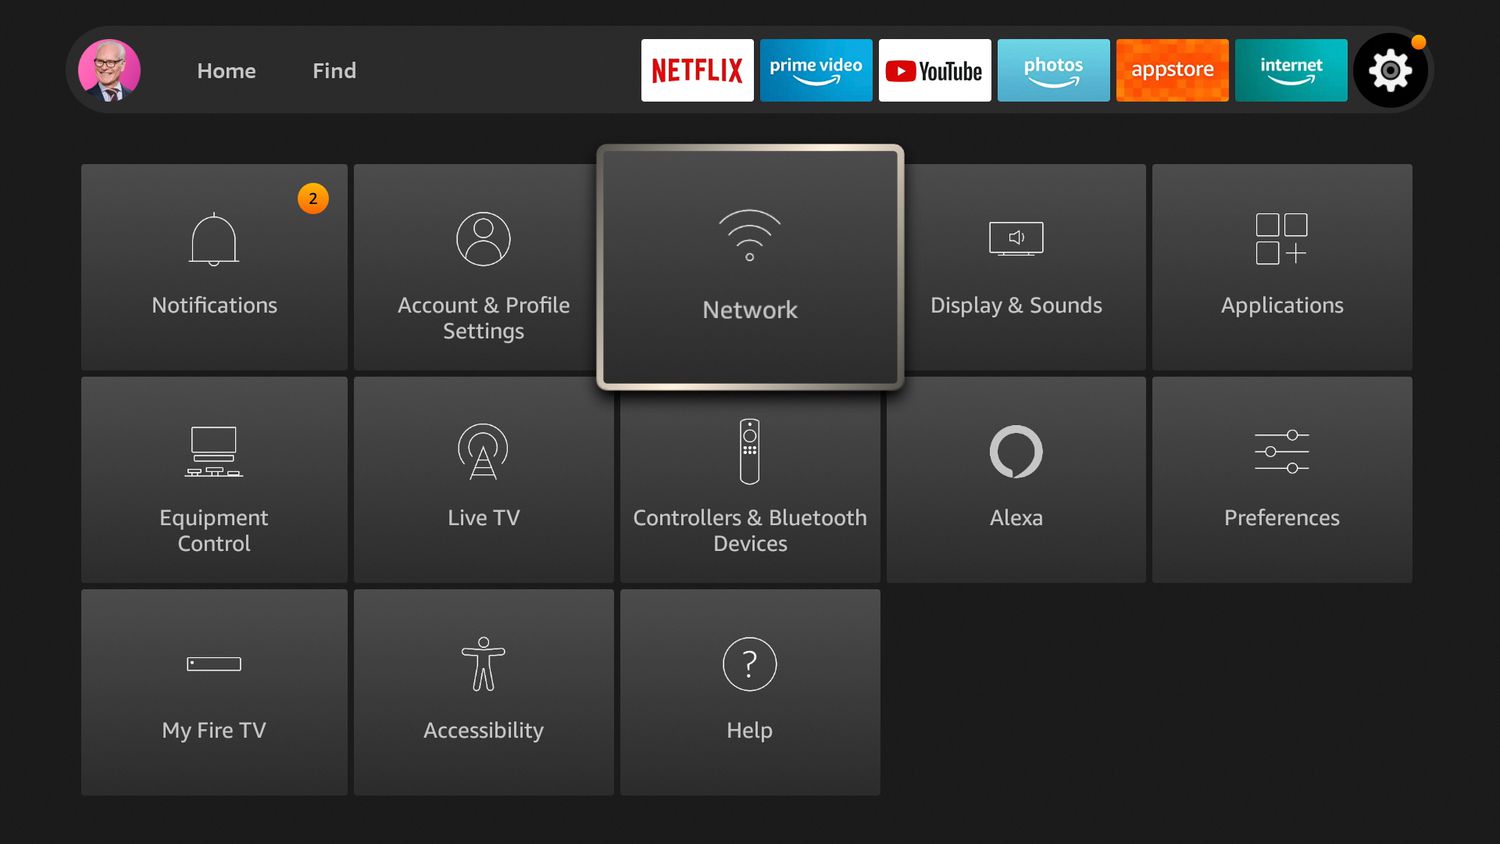 Go to FireStick settings and select "Network".
Ensure that the Wi-Fi network you are connected to is correct.